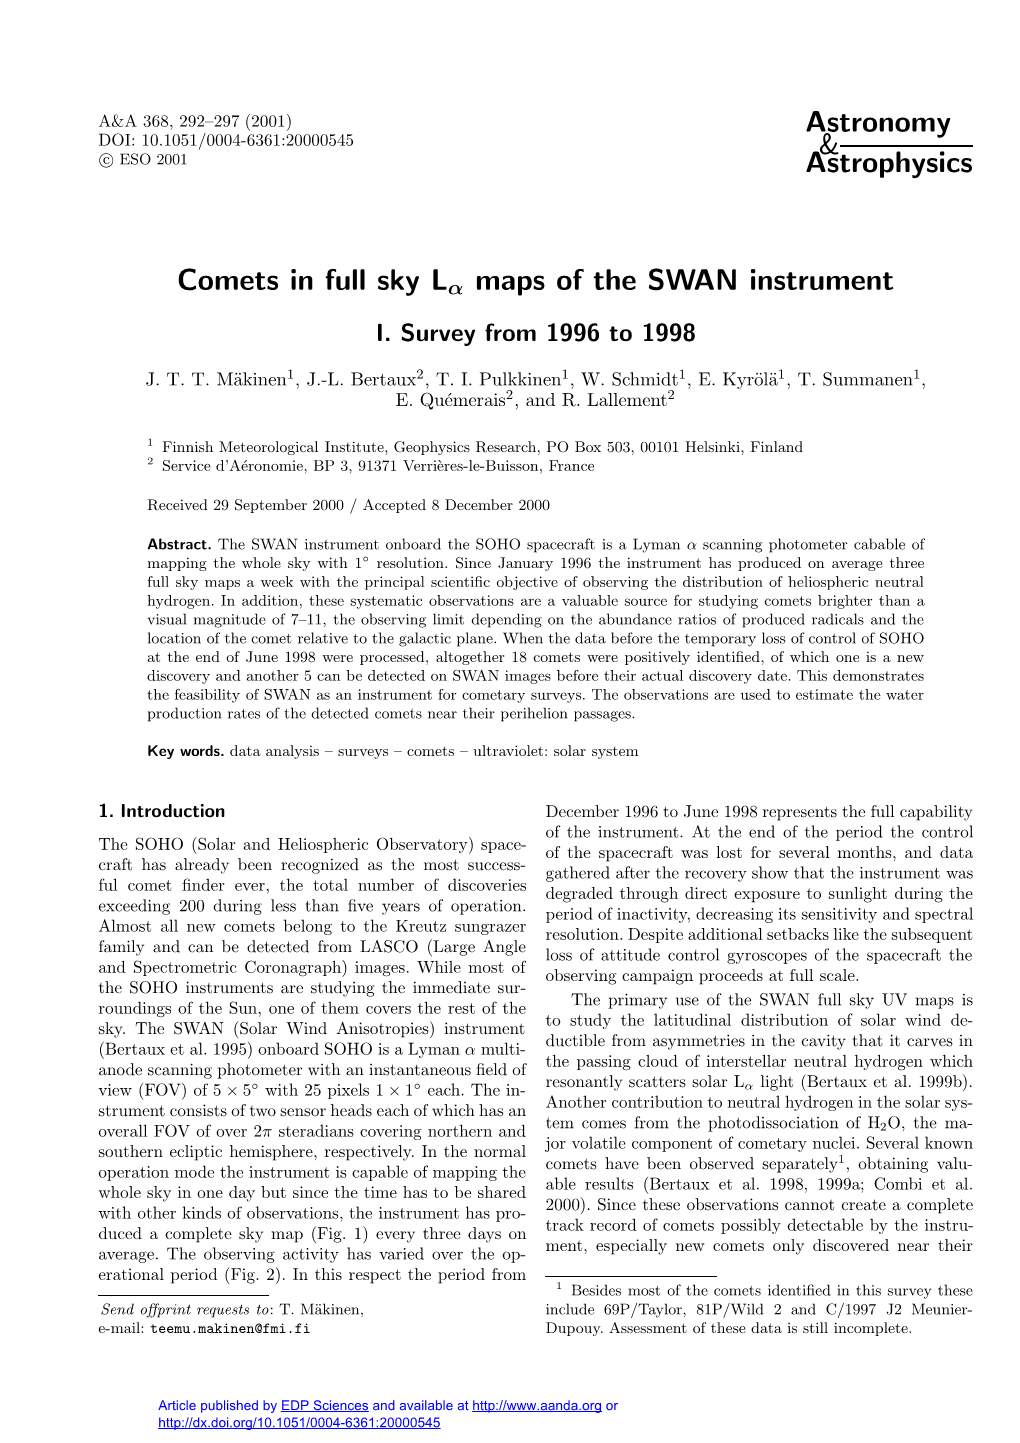 Comets in Full Sky $\Mathsf{L {\Alpha}}$ Maps of the SWAN Instrument